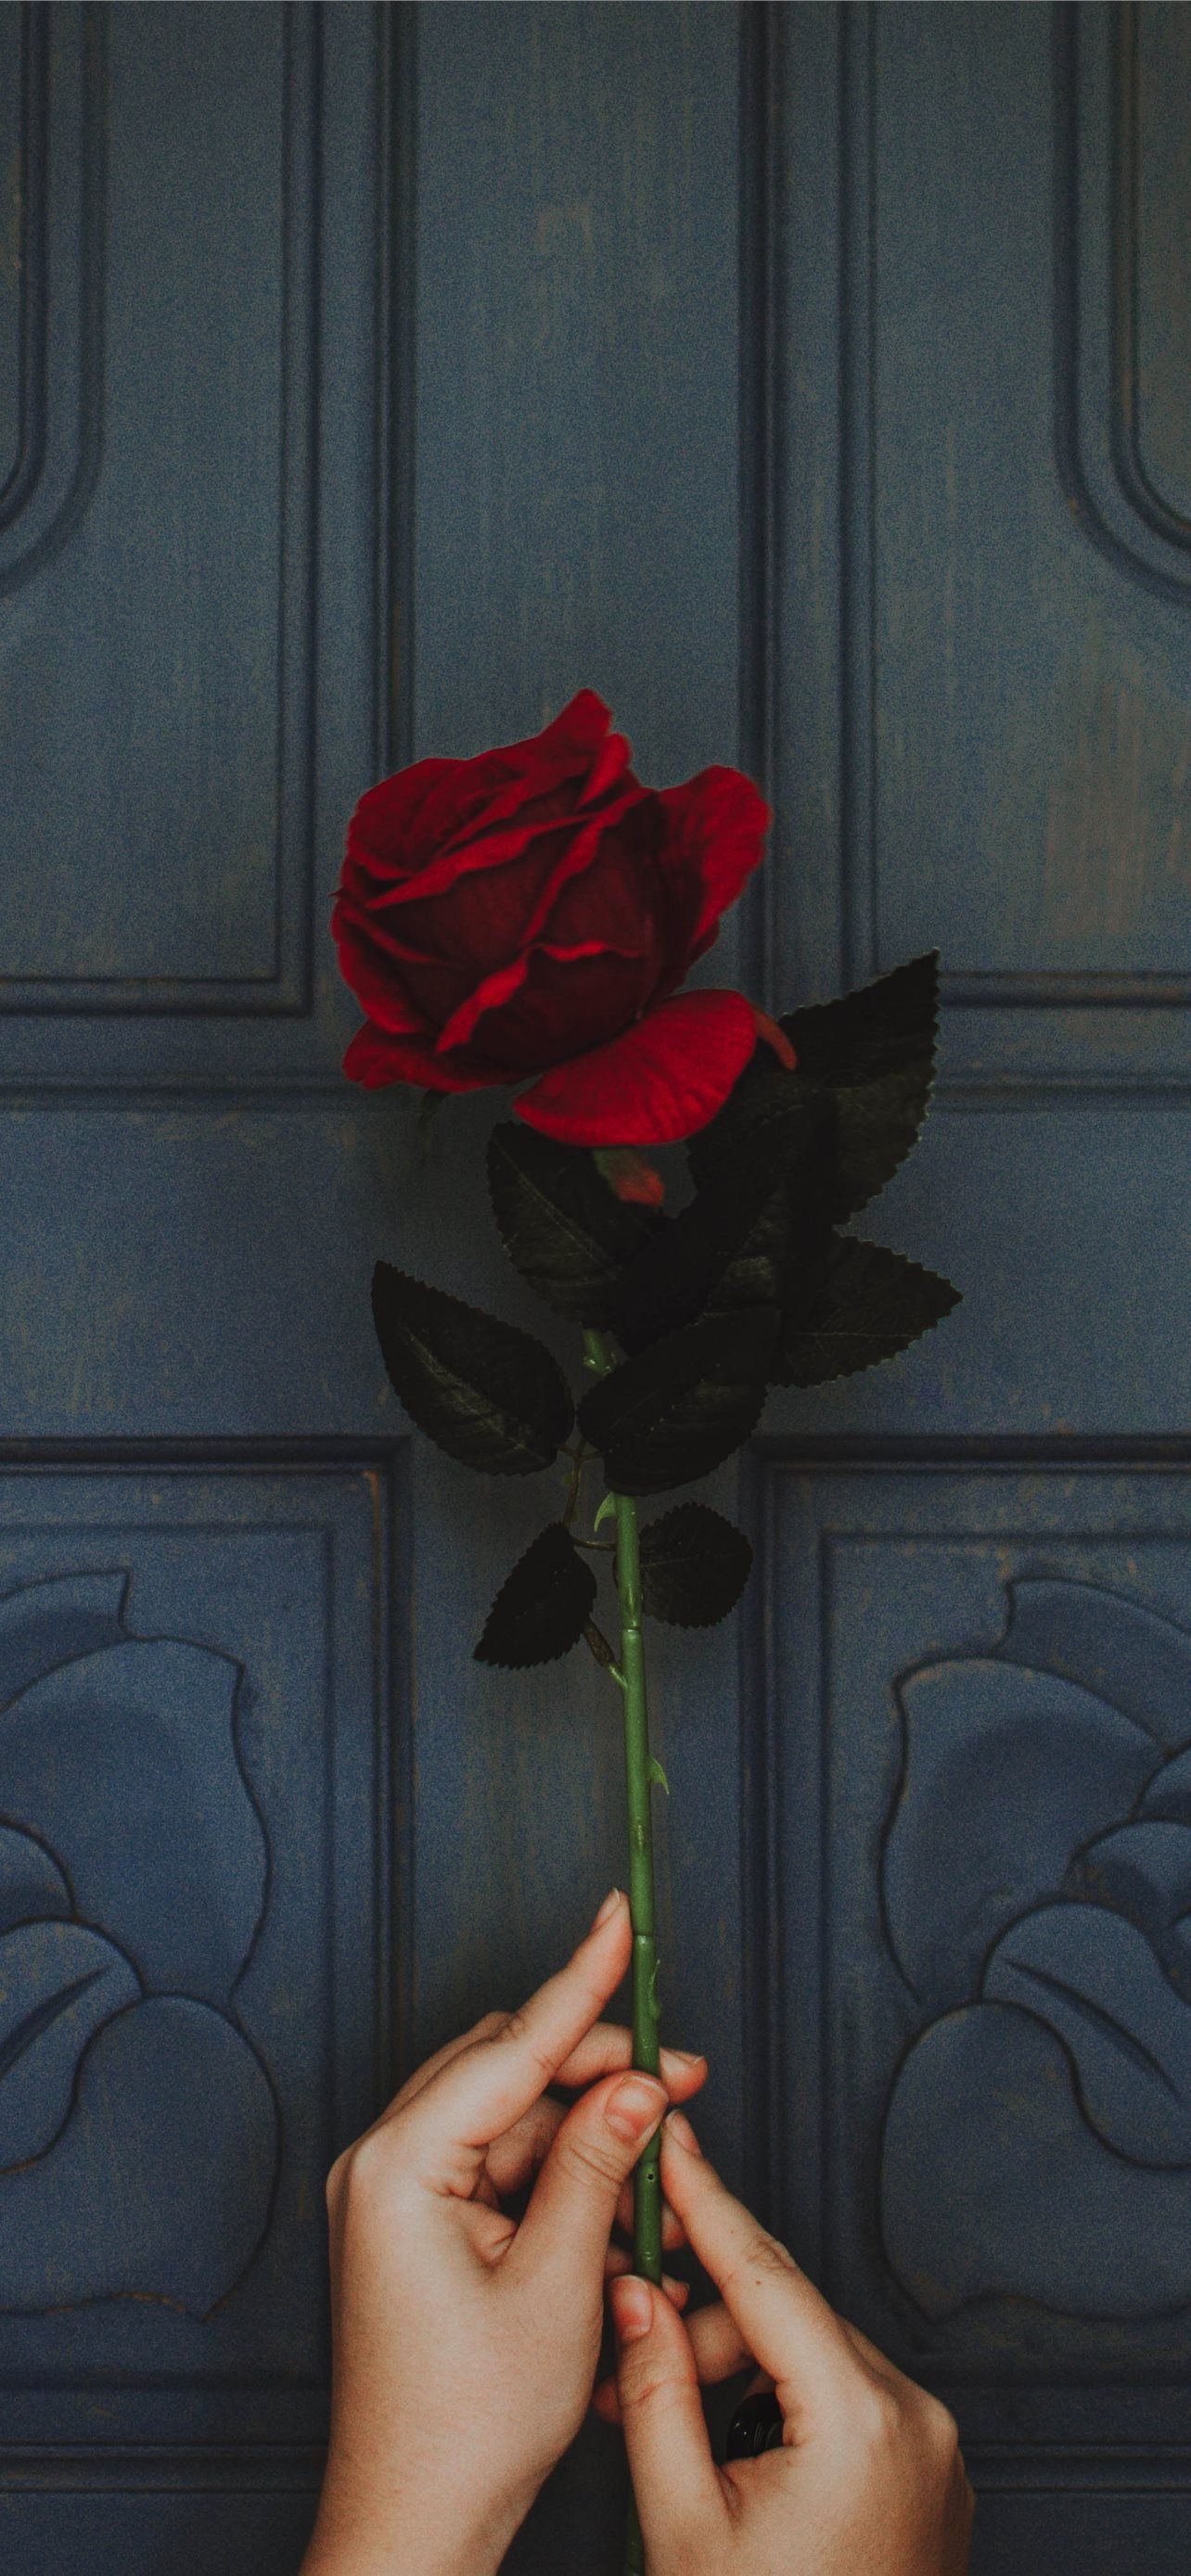 A woman's hands holding a red rose in front of a blue door. - 